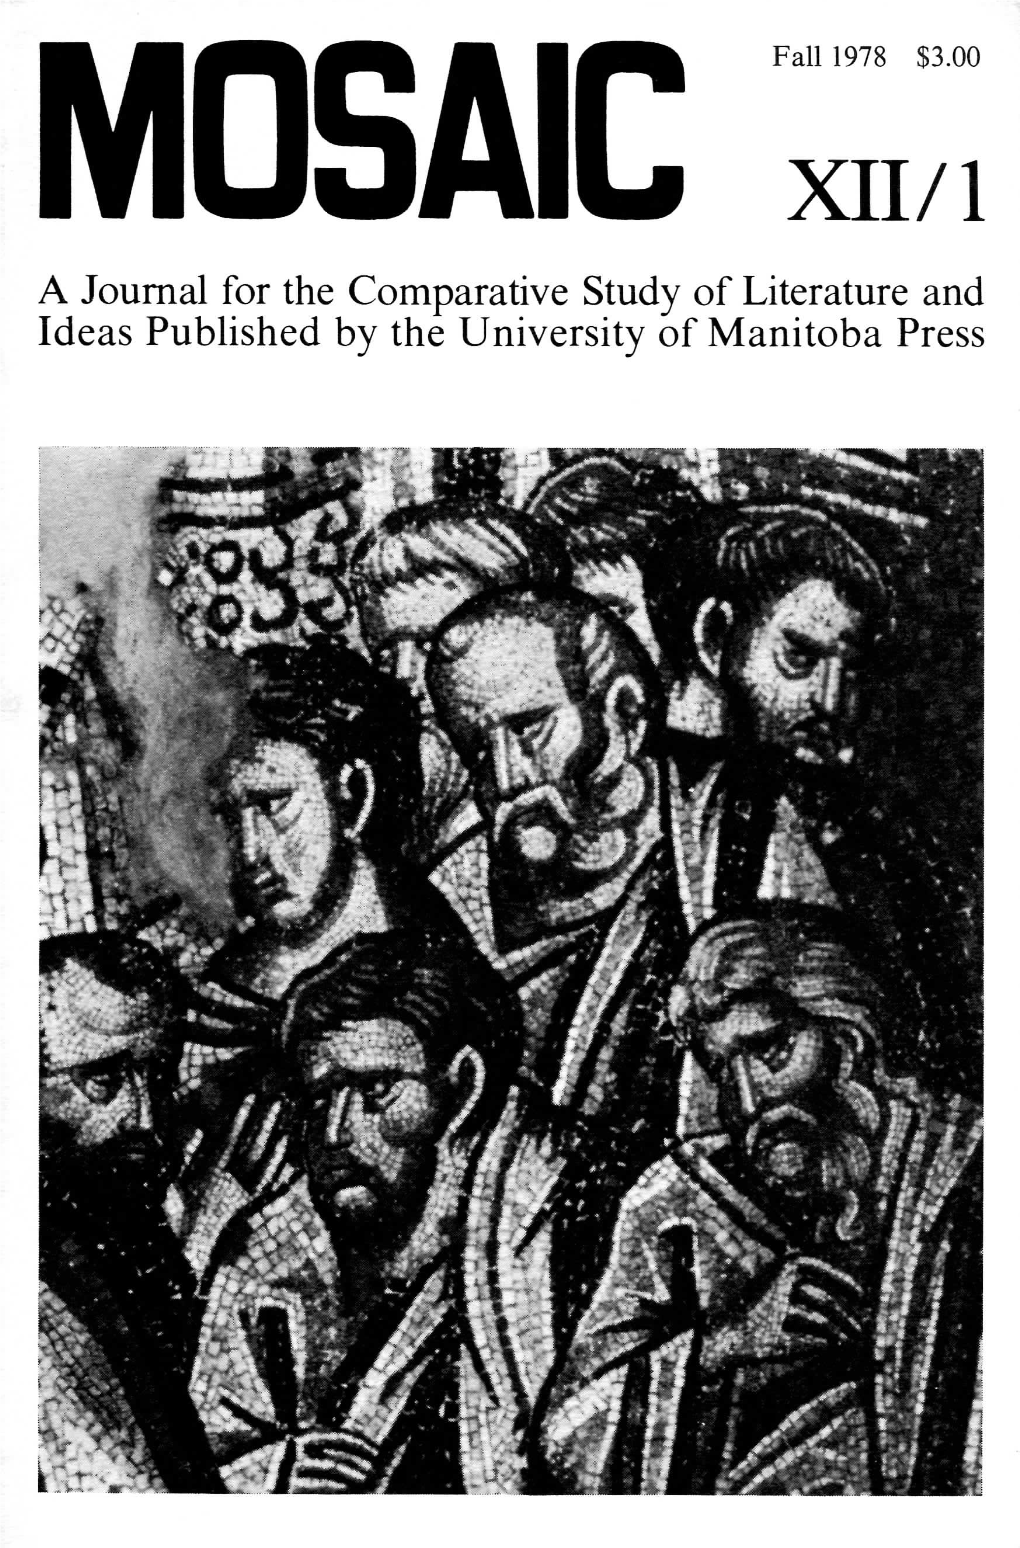 A Journal for the Comparative Study of Literature and Ideas Published by the University of Manitoba Press